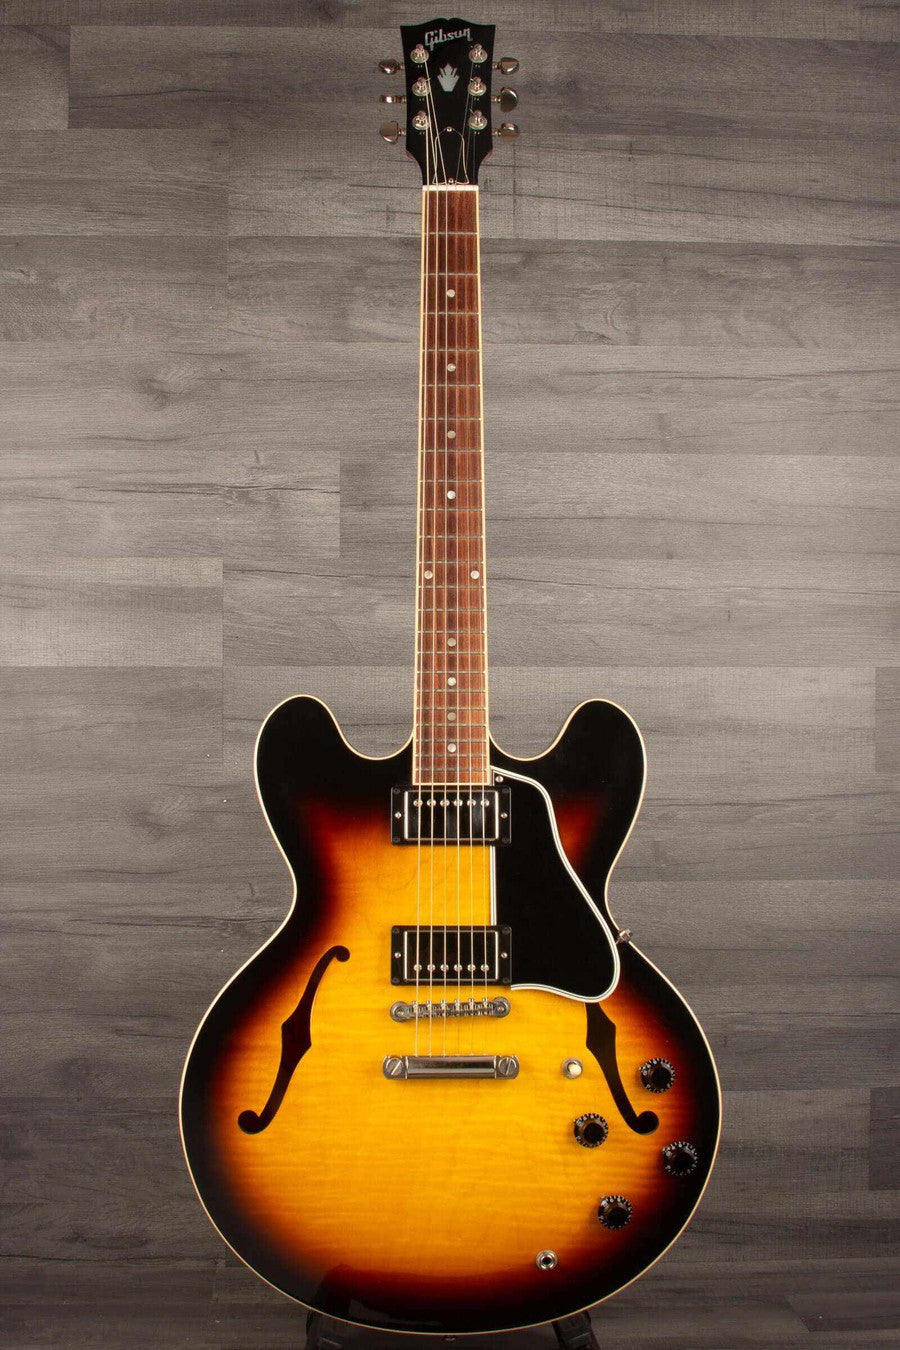 USED - 2008 Gibson ES335 Flame Top - Tobacco Sunburst